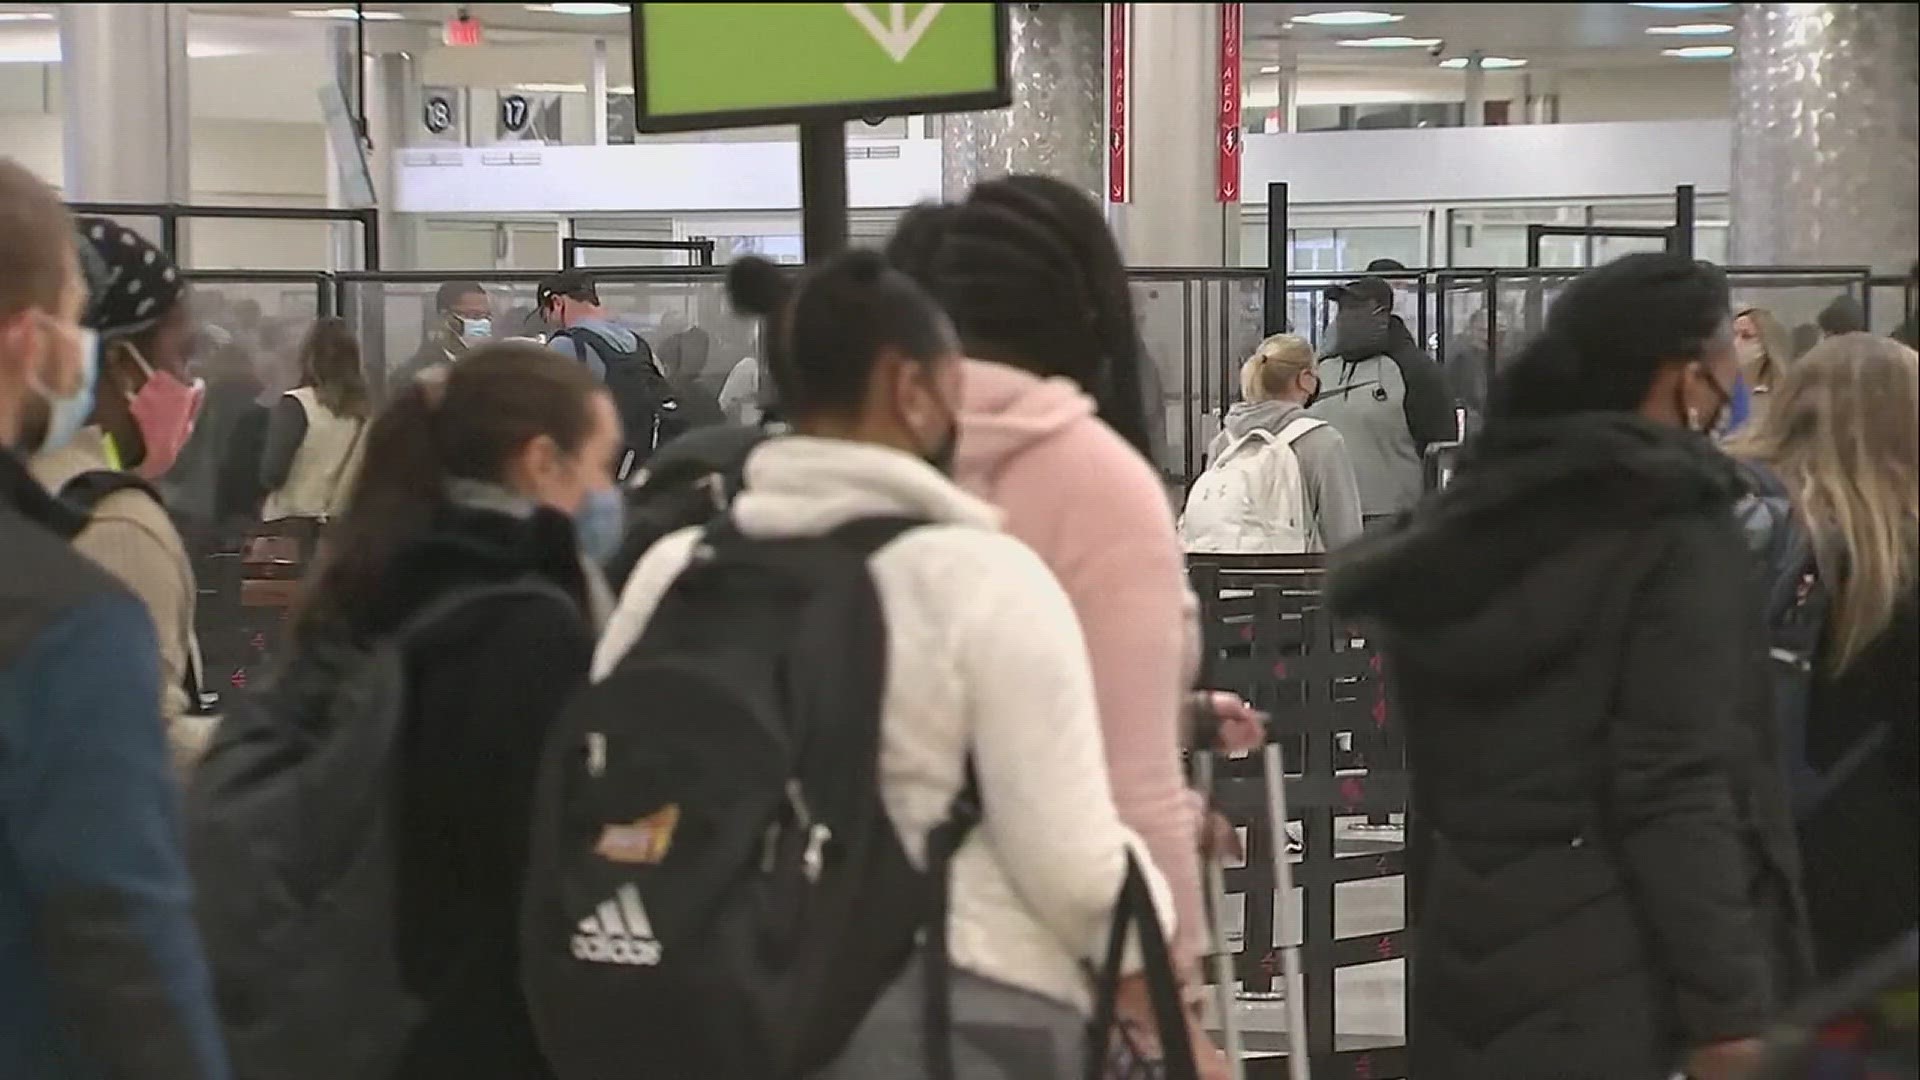 This rise in cases is partially due to increased passengers moving through US airports. TSA officials say passengers should be patient when boarding their flights.